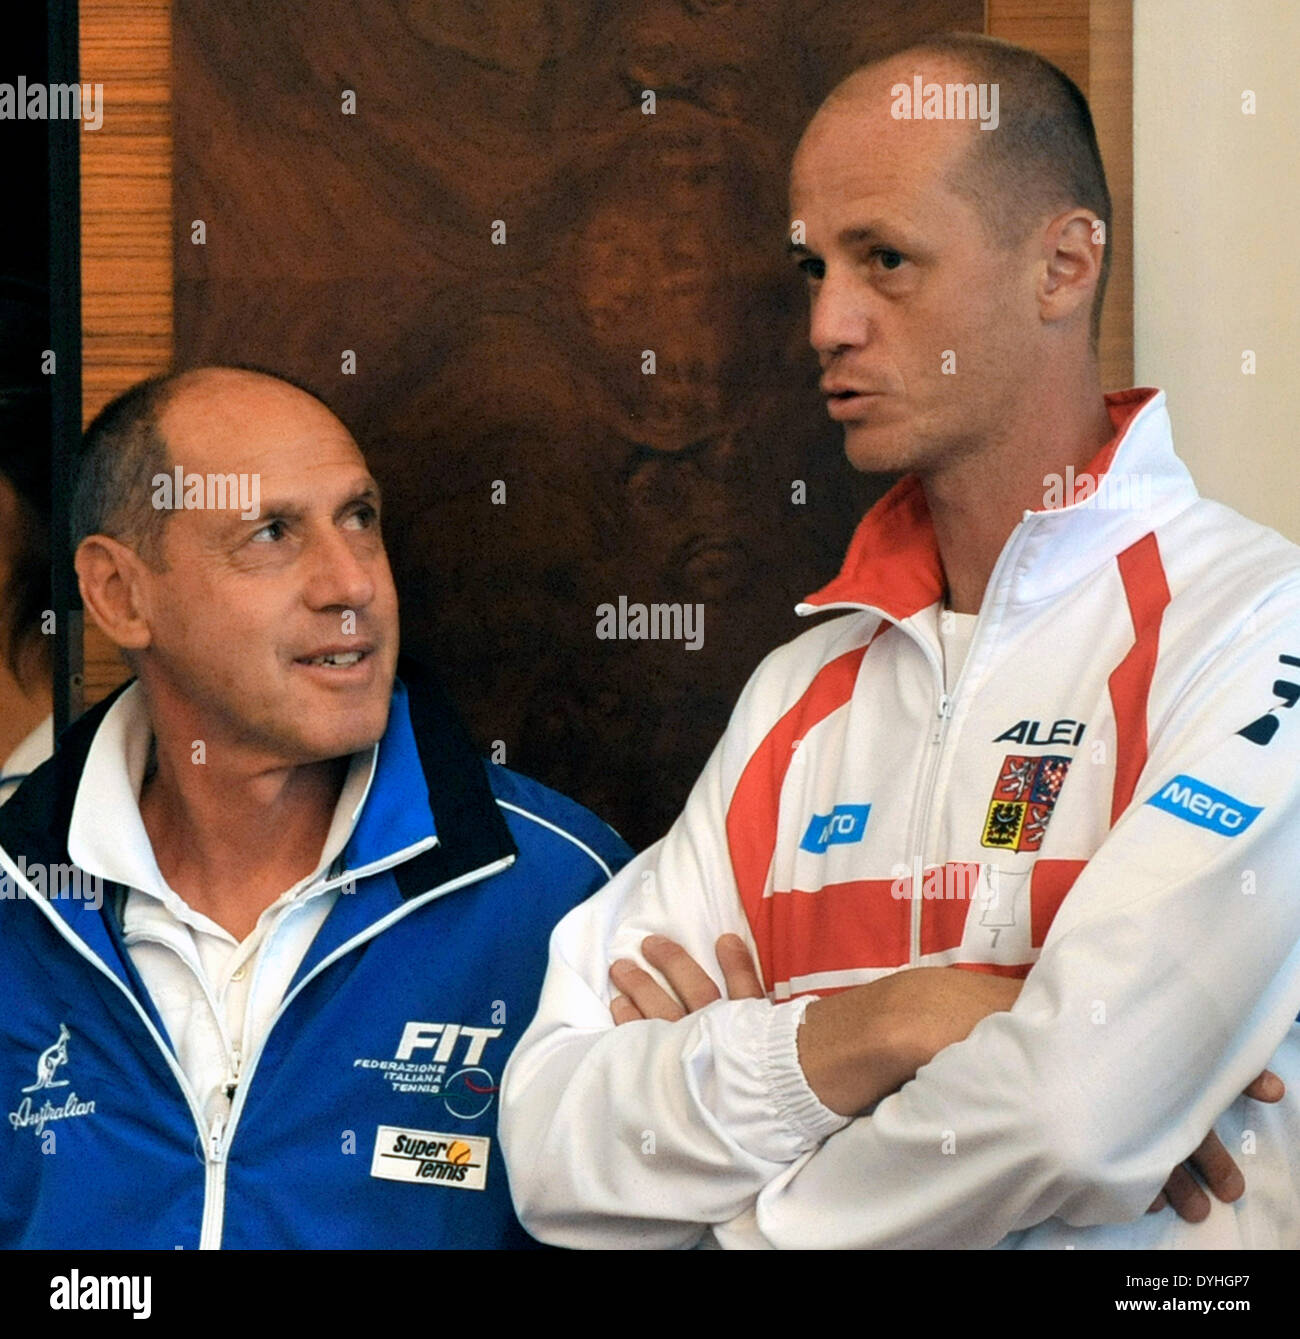 Ostrava, Czech Republic. 18th Apr, 2014. From left: Italian non playing tennis captain Corrado Barazzutti and Czech Petr Pala are seen during the drawing for the semifinal match of the Fed Cup Czech Republic vs. Italy in Ostrava, Czech Republic, April 18, 2014. The Czech Republic-Italy Fed Cup match will start on Saturday, April 19. © Jaroslav Ozana/CTK Photo/Alamy Live News Stock Photo